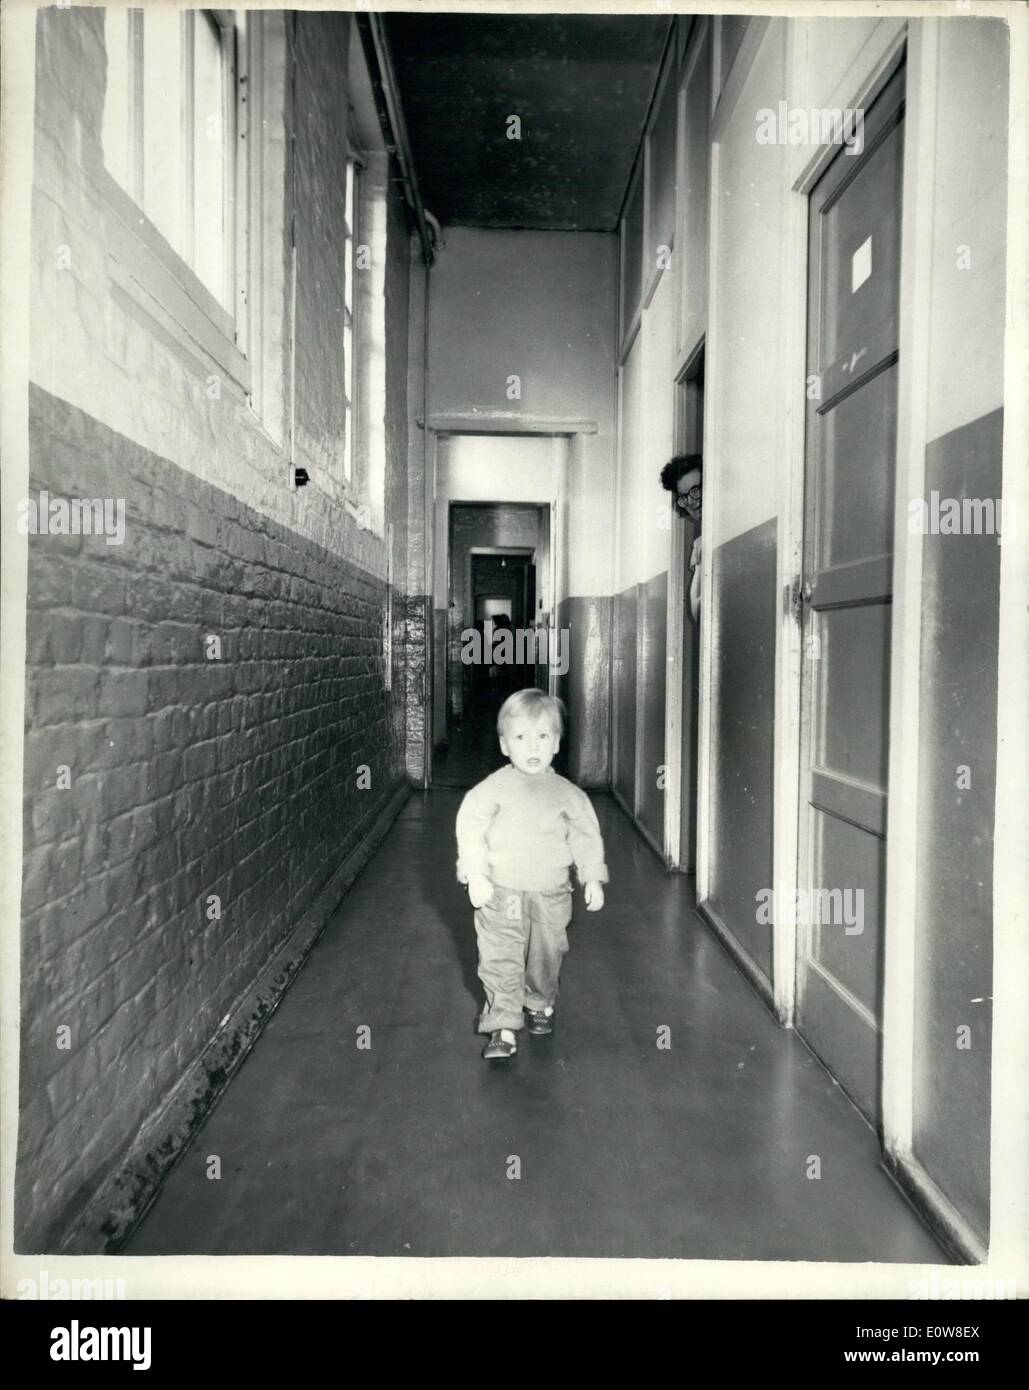 Nov. 11, 1961 - LONDON COUNTY COUNCIL OPENS CENTRES FOR HOMELESS TO PRESS INSPECTION TODAY Members of the Press were today to vieit the London County GounoilleIntre for Homeleee Families at Newington ate in London. PHOTO SHOWS: 18-month-old PETER PRICE, one of the Homelese at ''ewington Lane today. He is one of six ohildren in a family and has been at the oentre fo,.. three weeks, Stock Photo